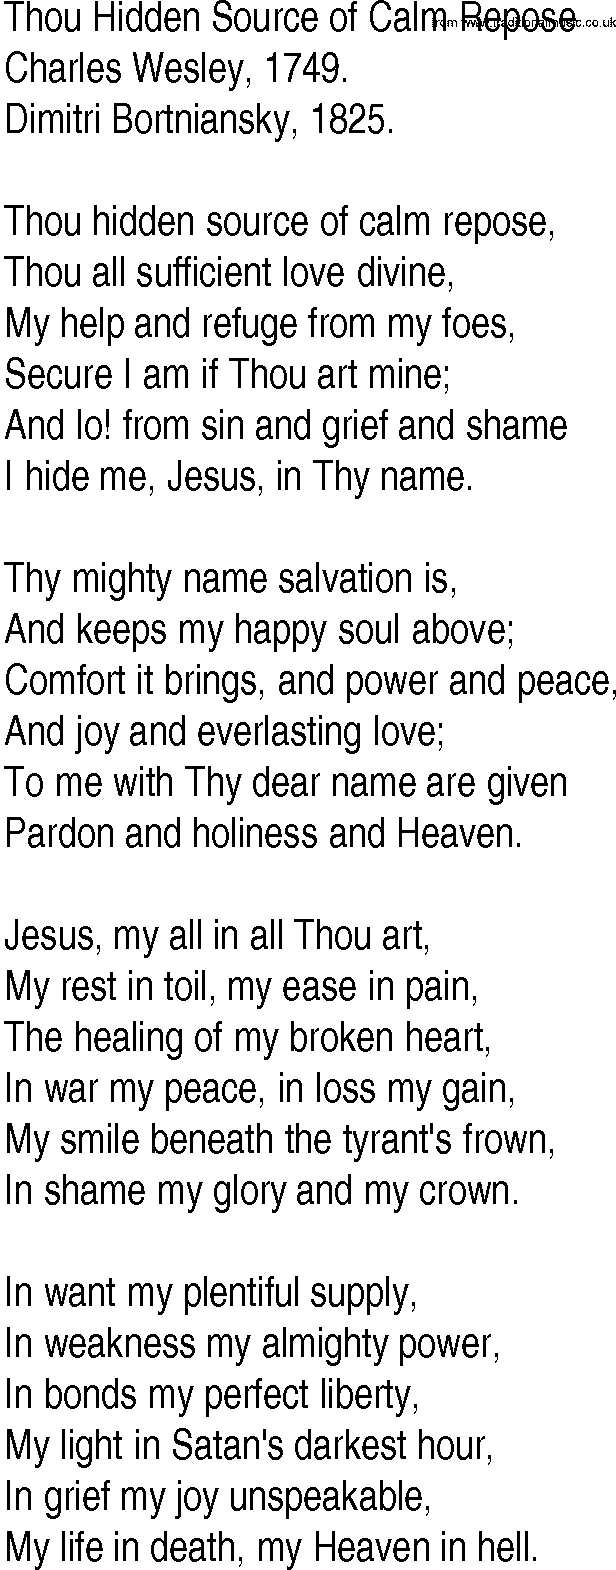 Hymn and Gospel Song: Thou Hidden Source of Calm Repose by Charles Wesley lyrics